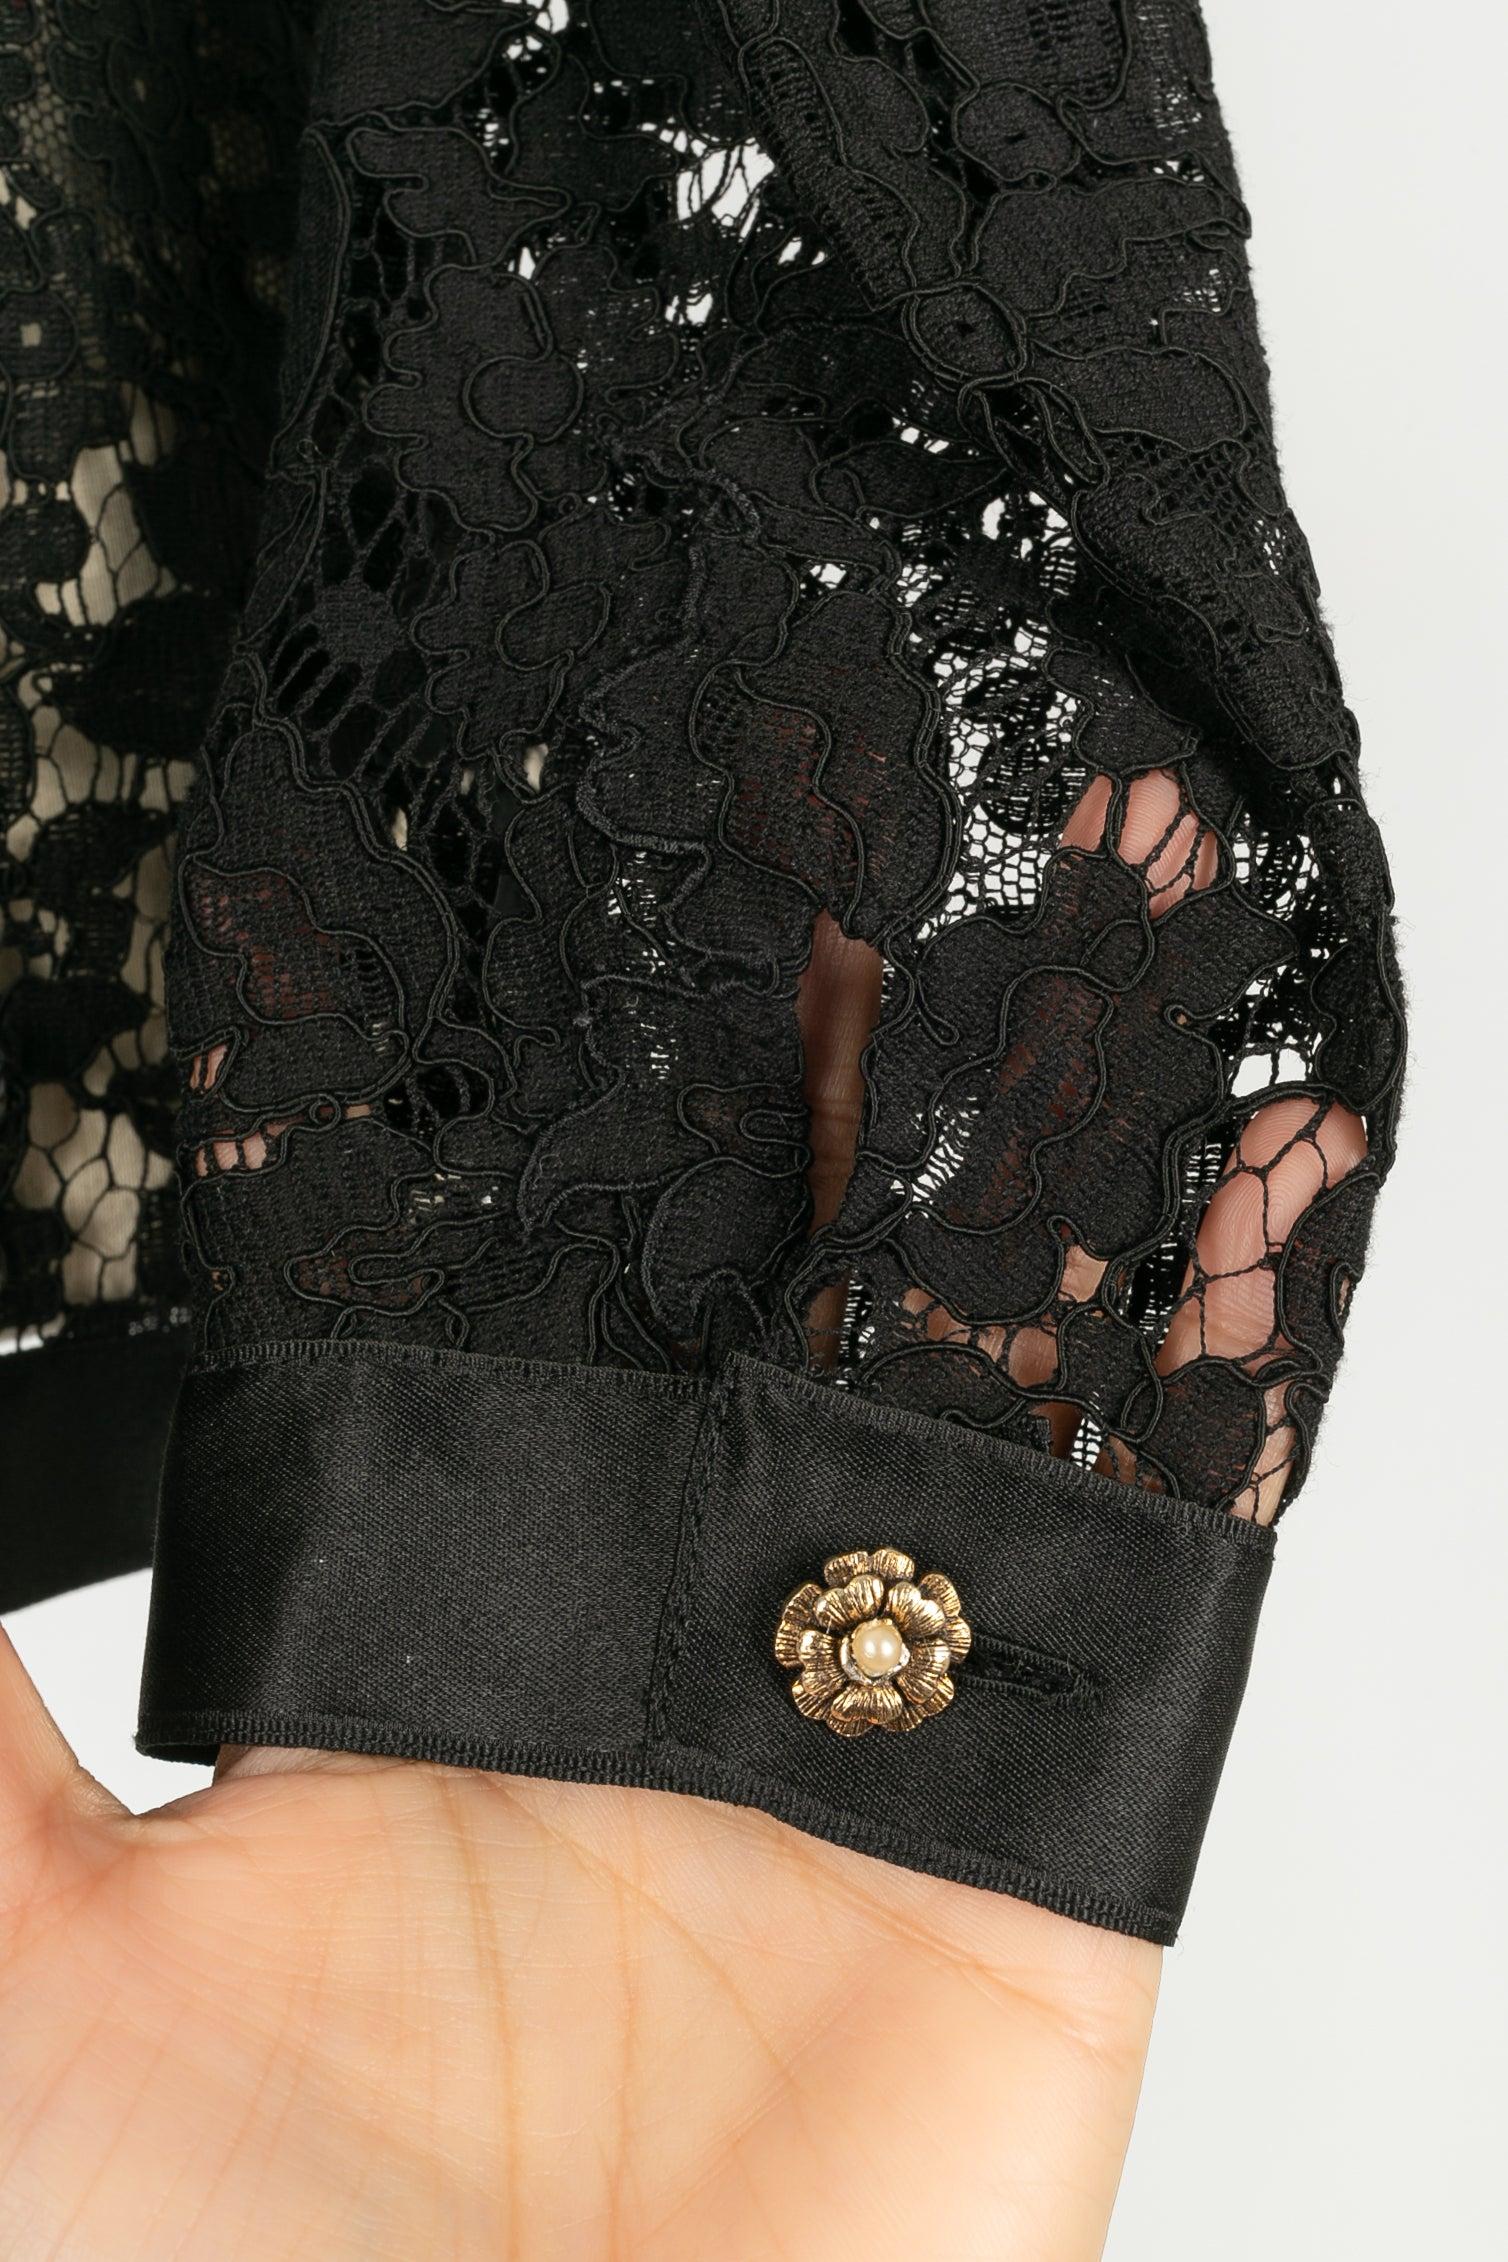 Chanel Black Lace and Silk Set For Sale 10